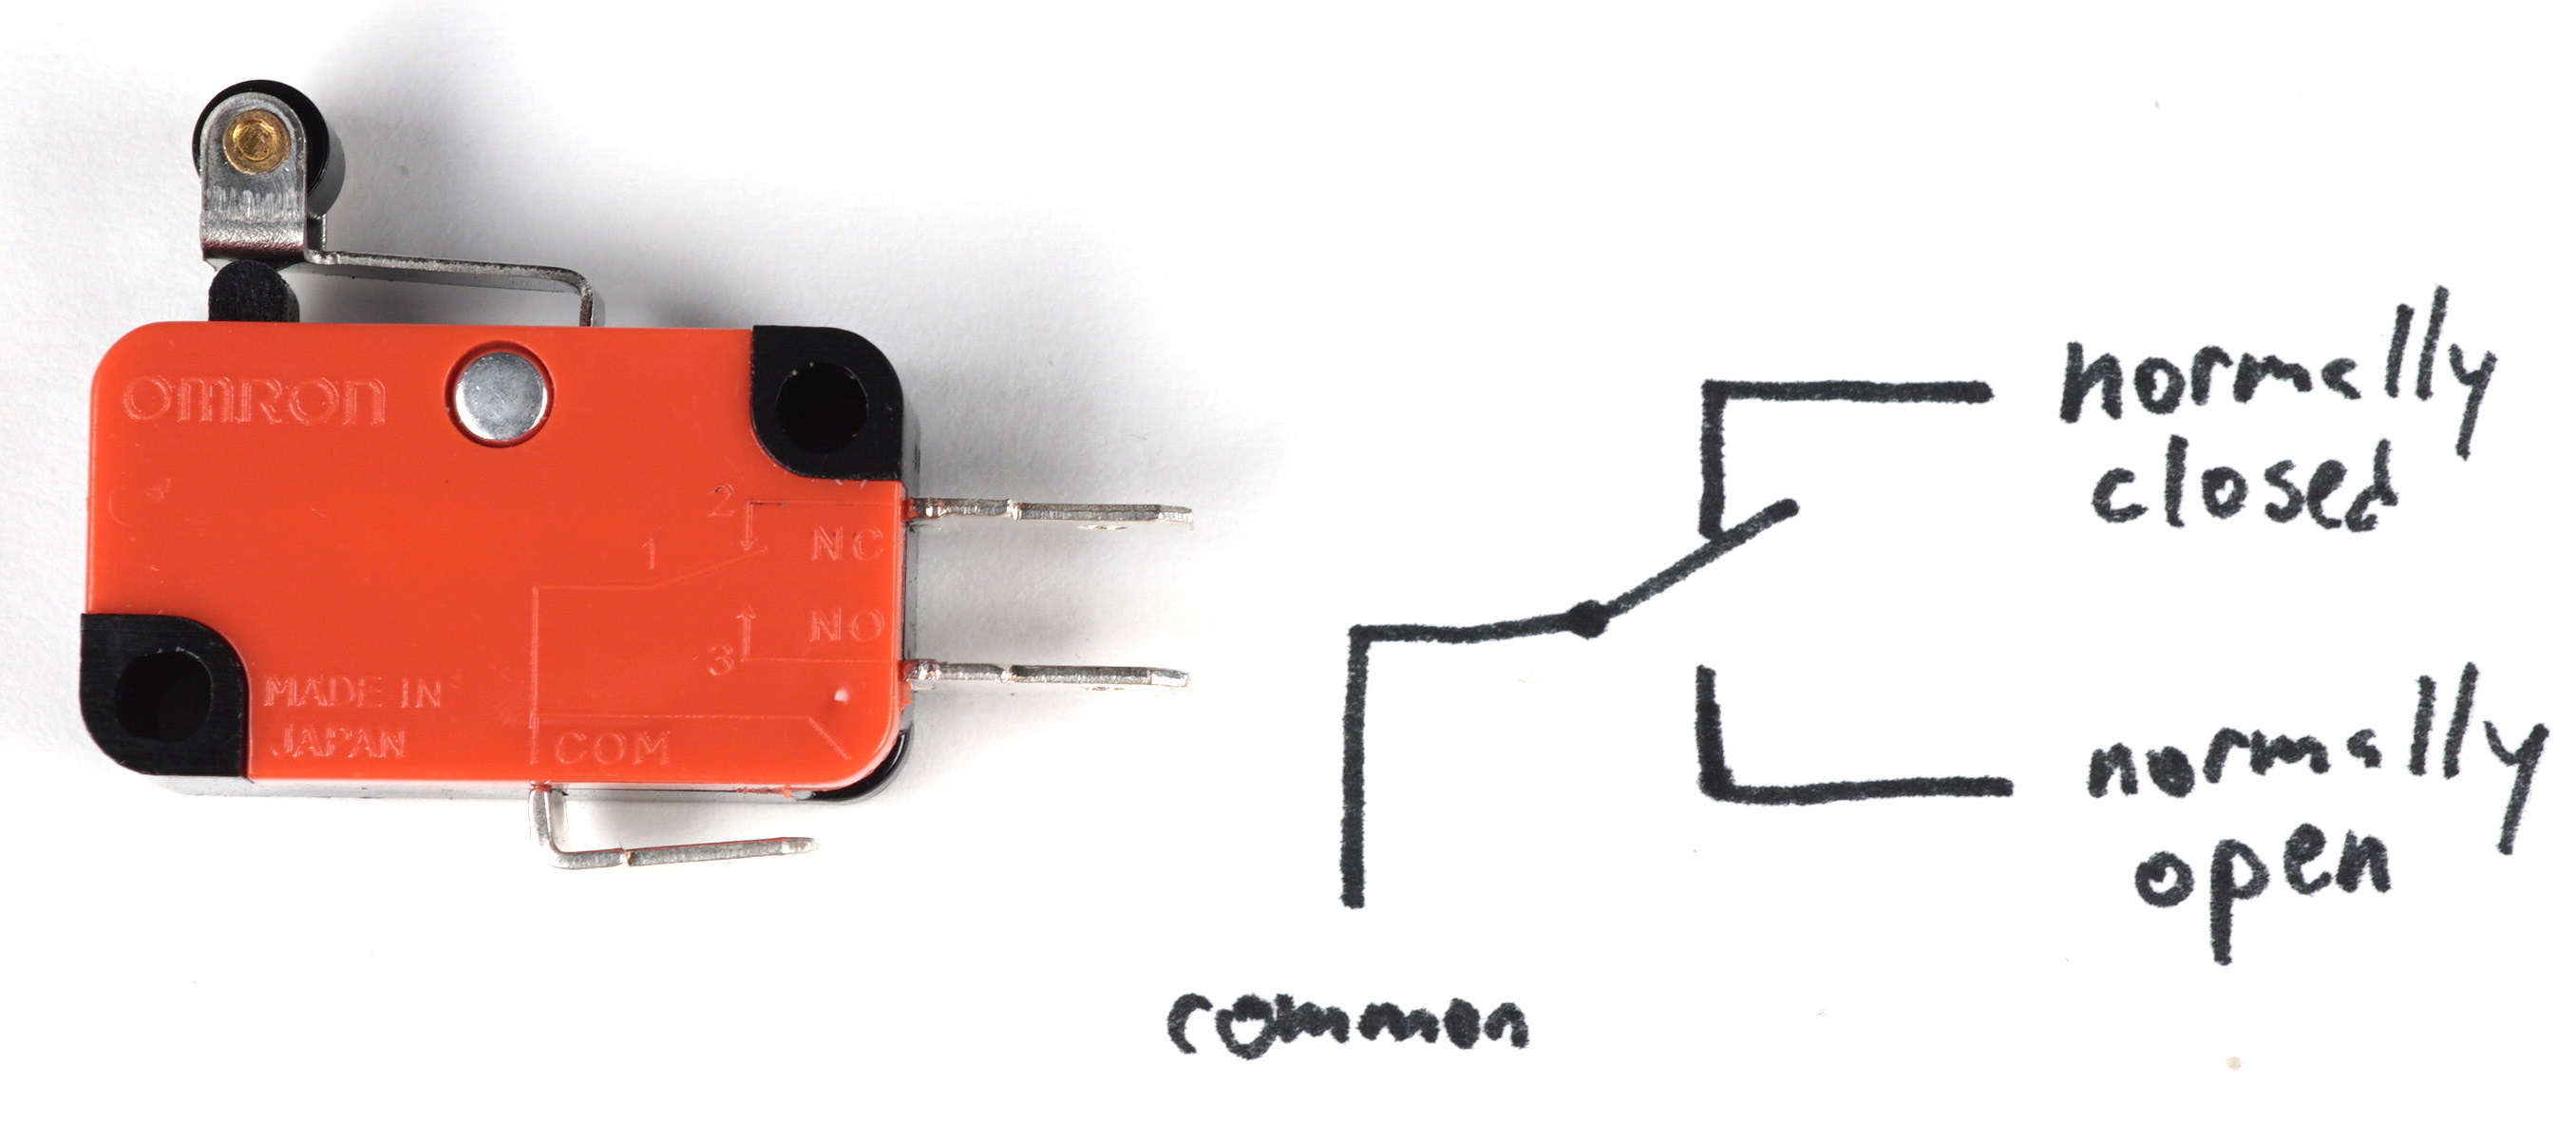 Image of a medium-sized, red lever switch on its side. The bottom metal tab of the switch, labeled "COM," is the common lead, and on the right side of the switch there are two connections. The upper right connection is labeled "NC" for normally closed, and the bottom right connection is labeled "NO" for normally open. The schematic drawing illustrating switch's operation as described is visible in the raised plastic of the part.